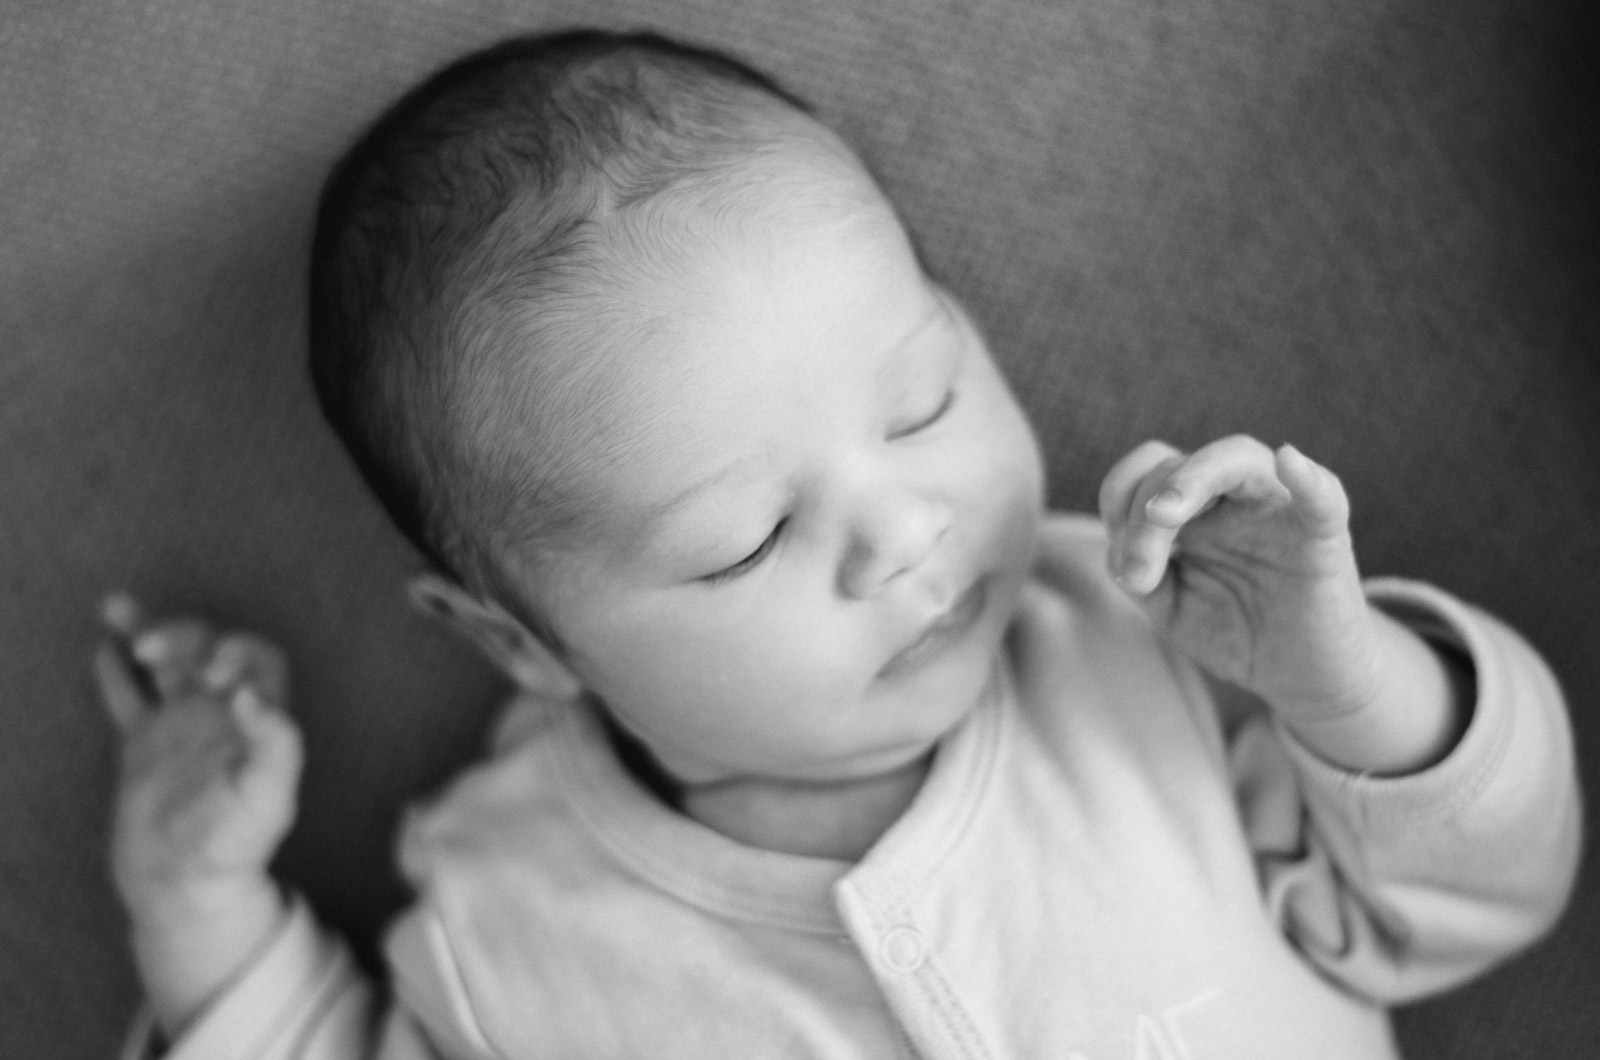 Newborn photography for a very special baby